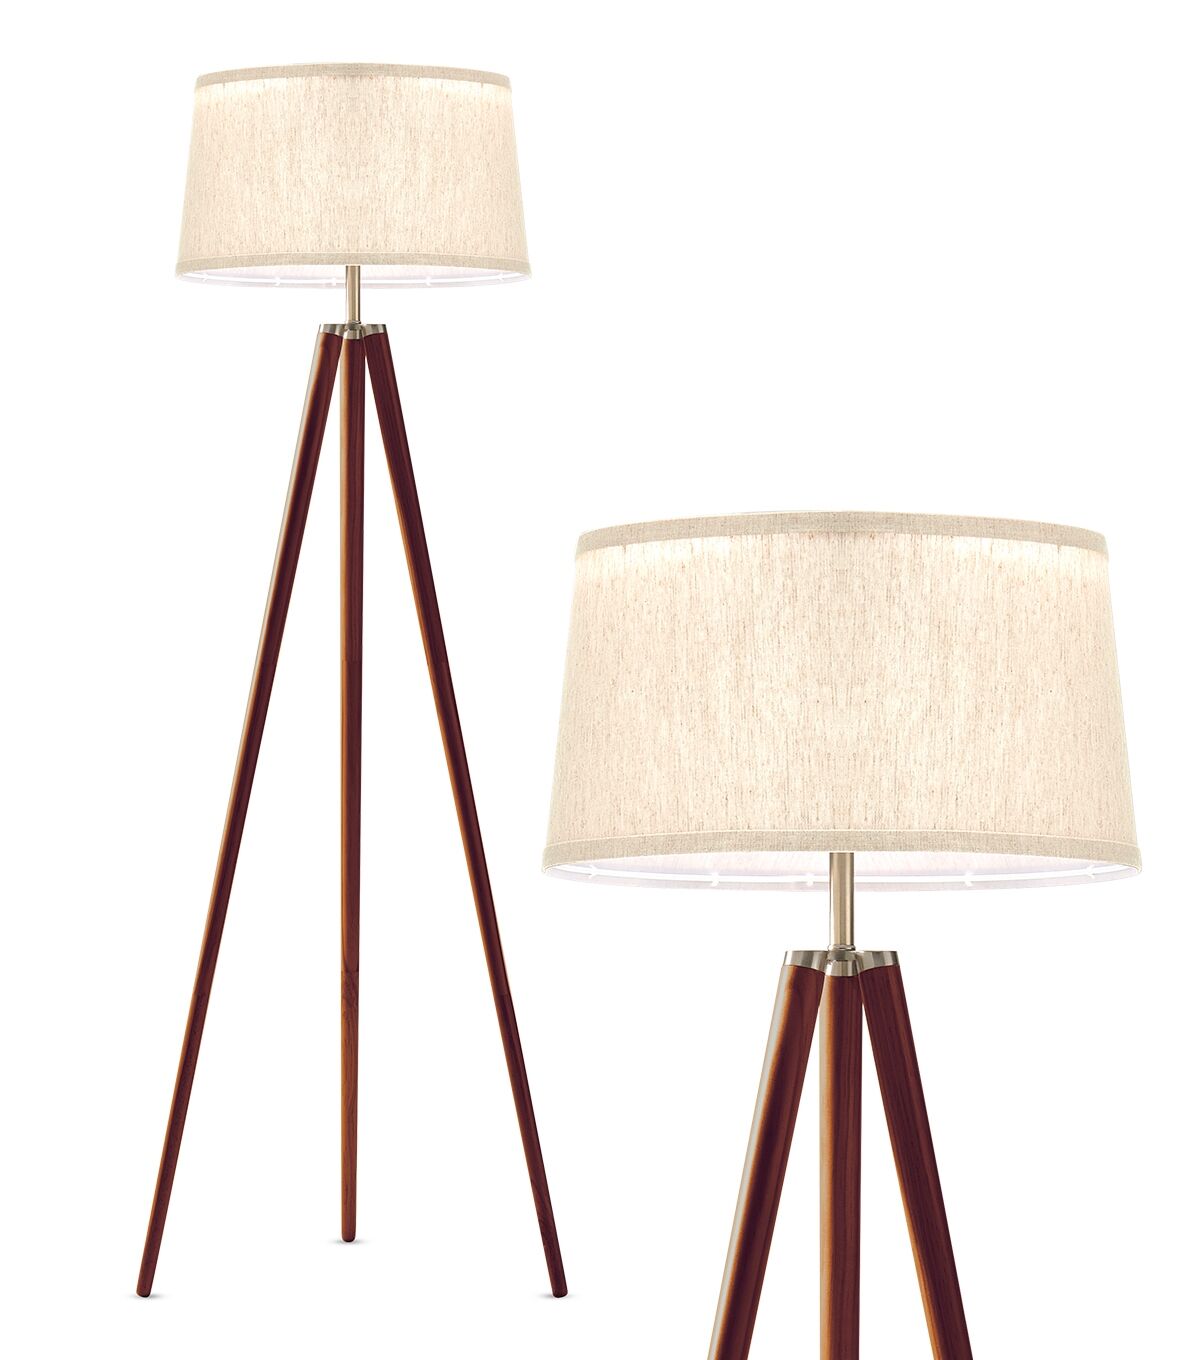 Brightech Emma Led Contemporary Tripod Floor Lamp with Wooden Legs - Walnut Brown